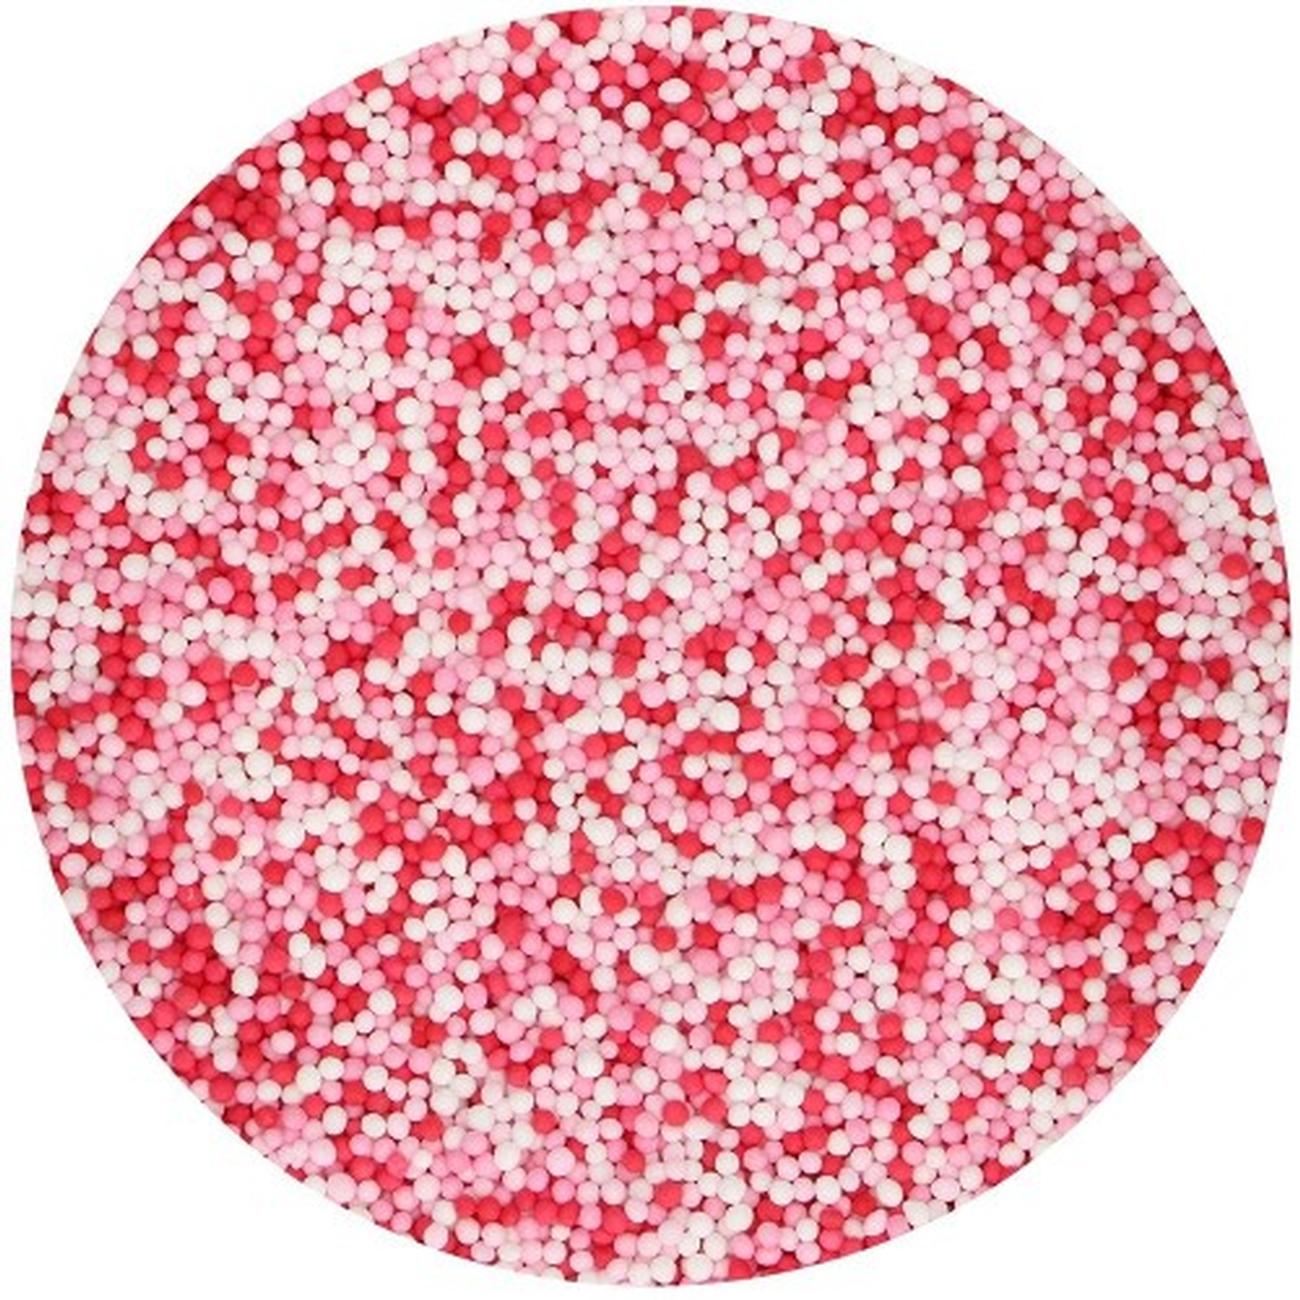 funcakes-lots-of-love-nonpareils-80g - FunCakes Nonpareils Lots of Love 80 g